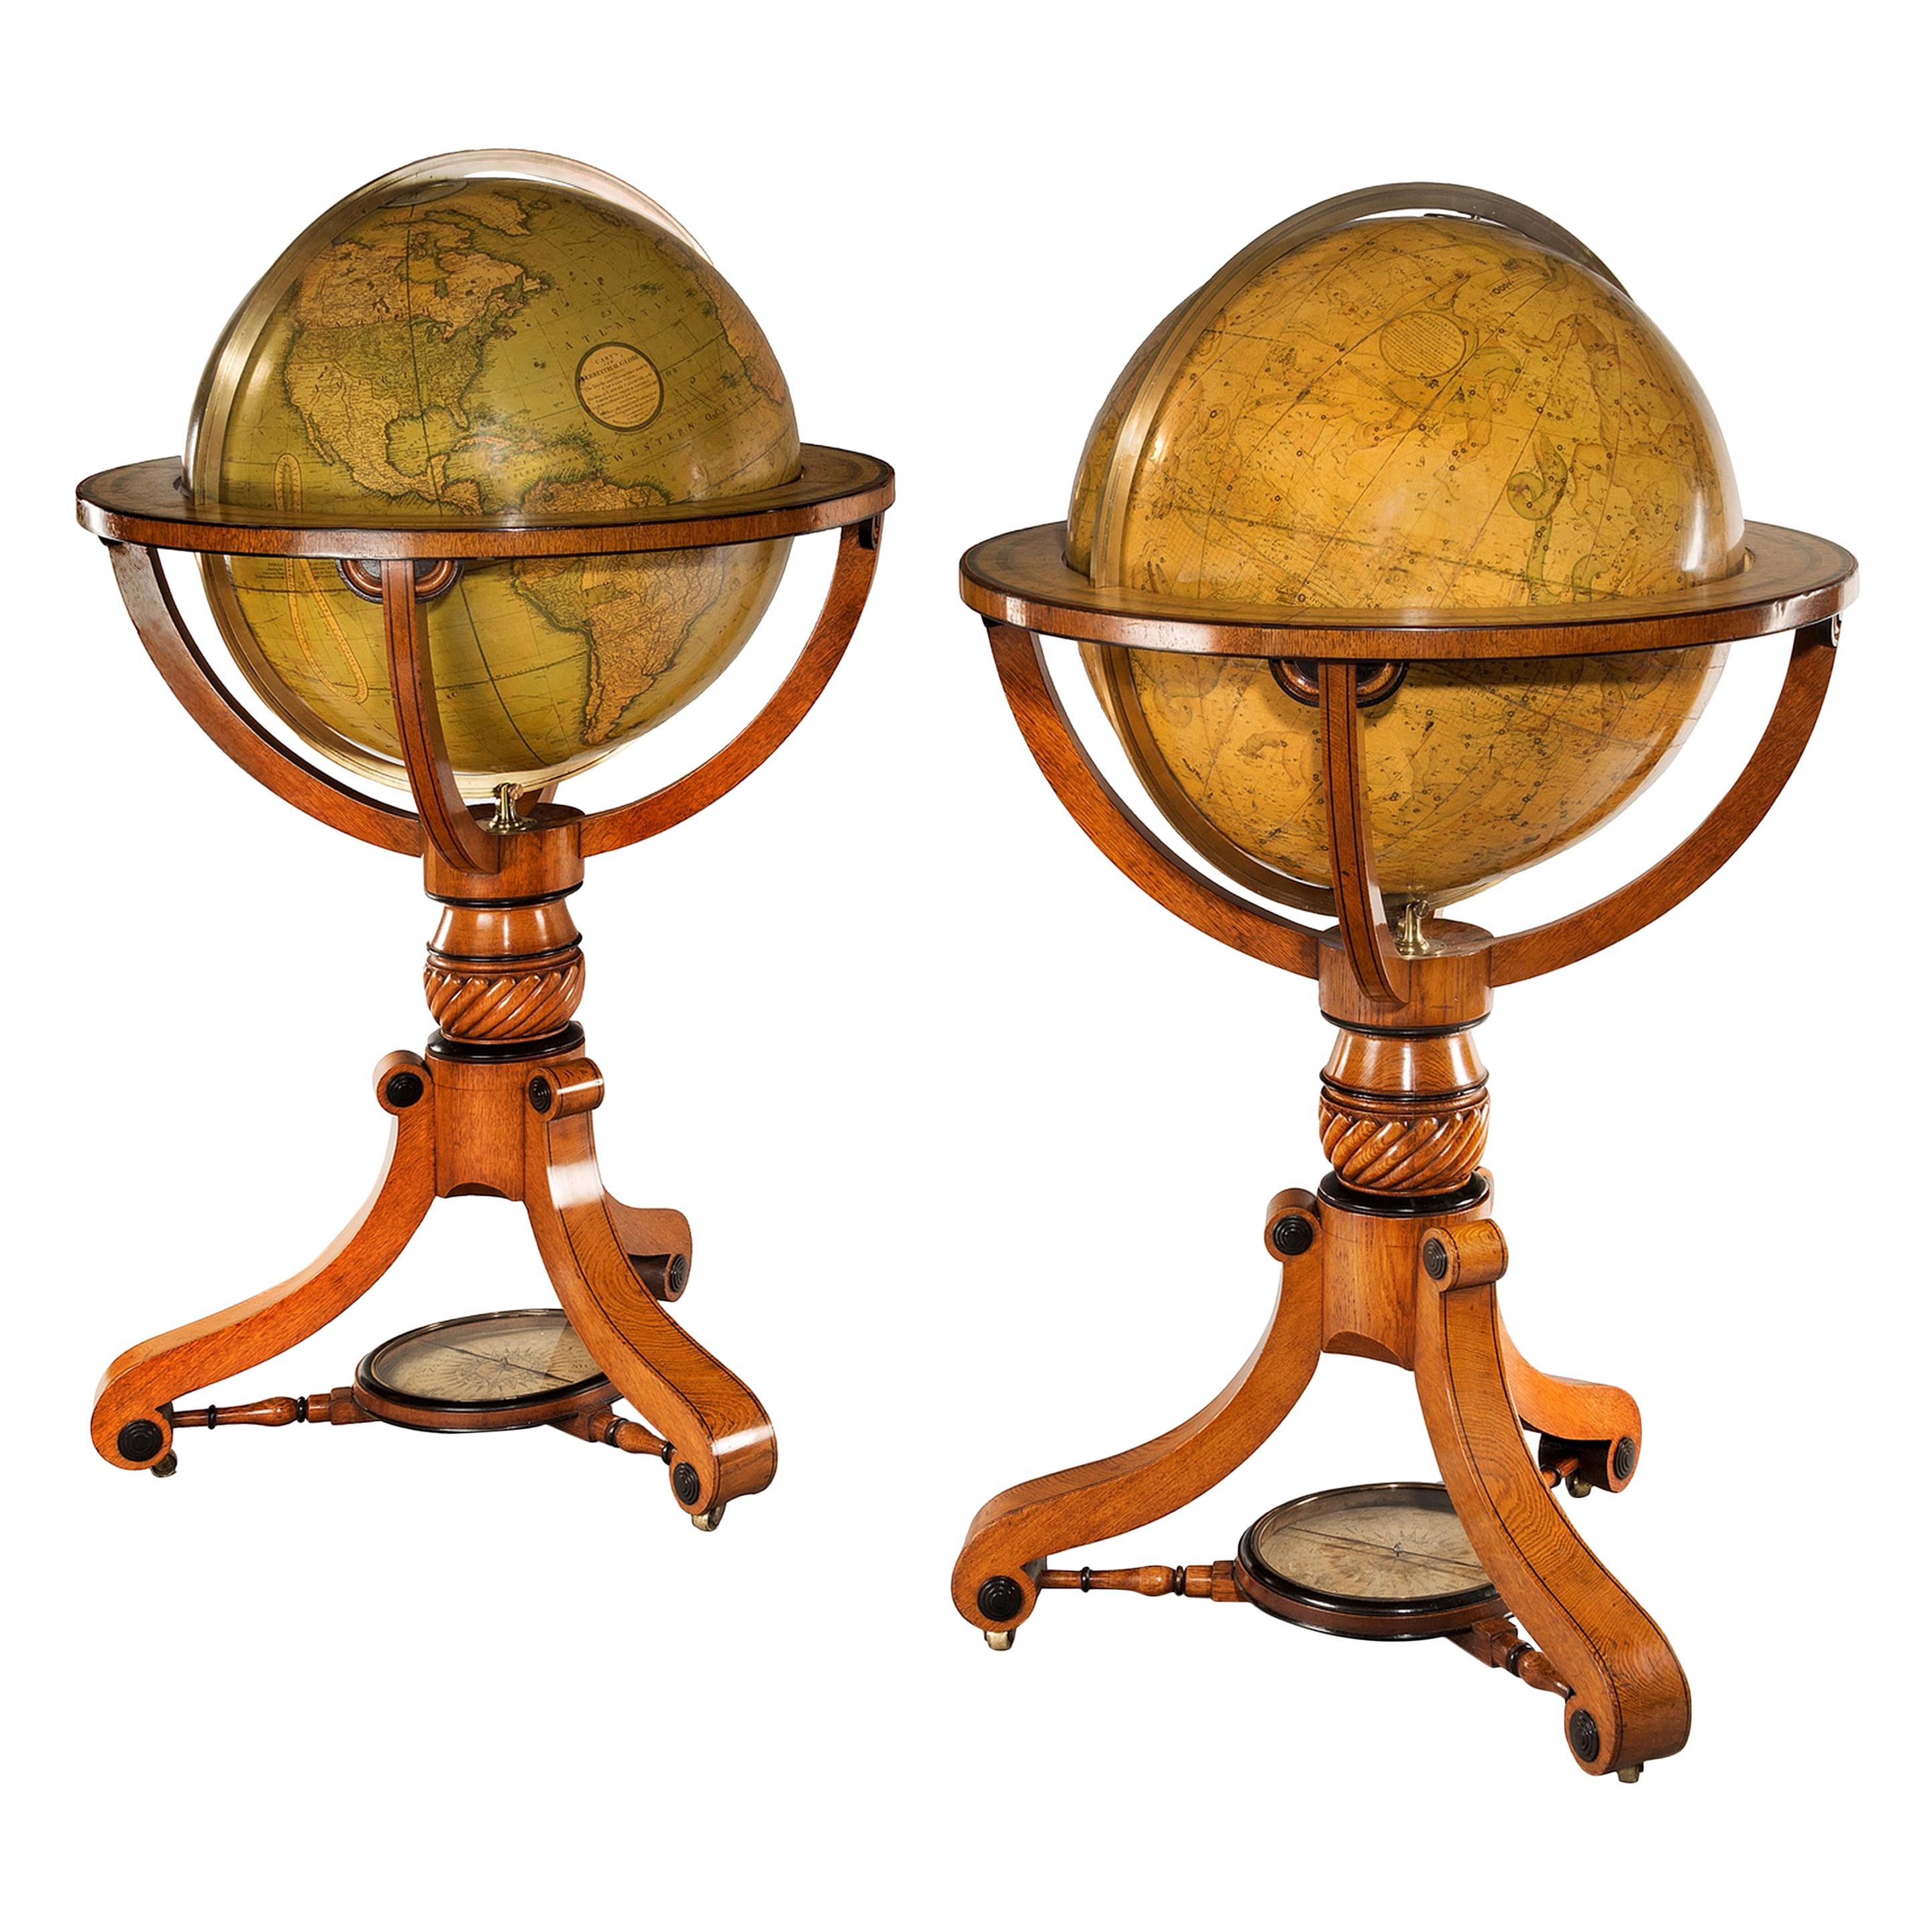 Pair of Cary’s Terrestrial and Celestial Library Globes